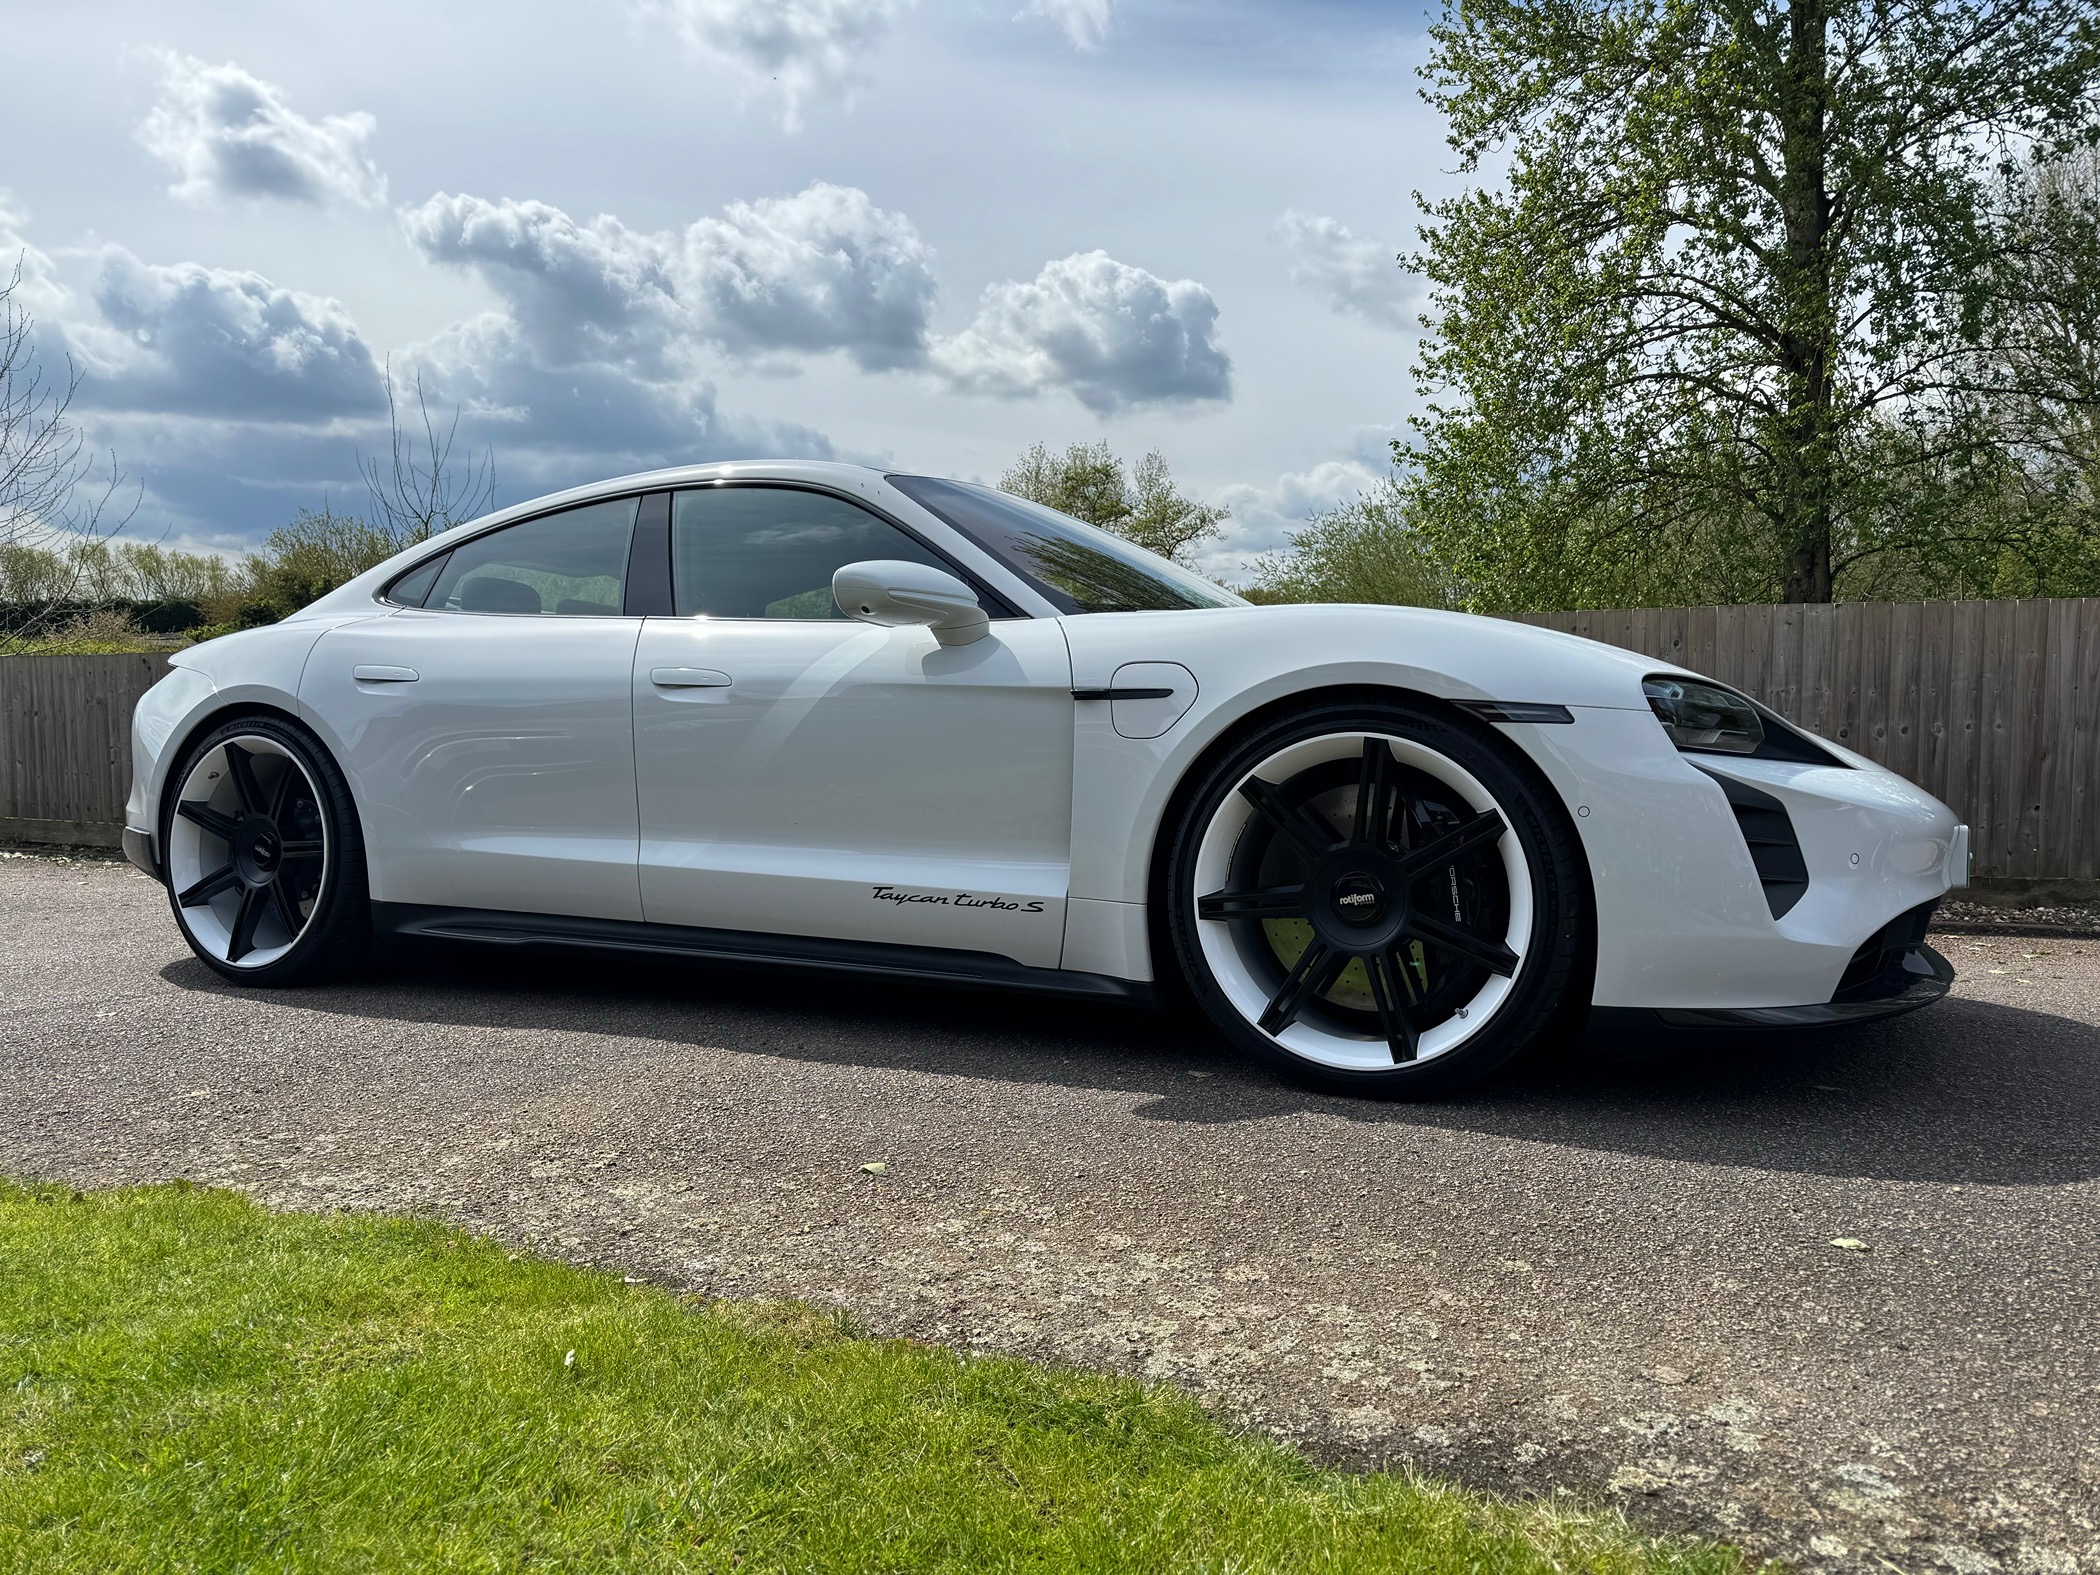 Porsche Taycan One step closer to that Mission E Concept look IMG_1439